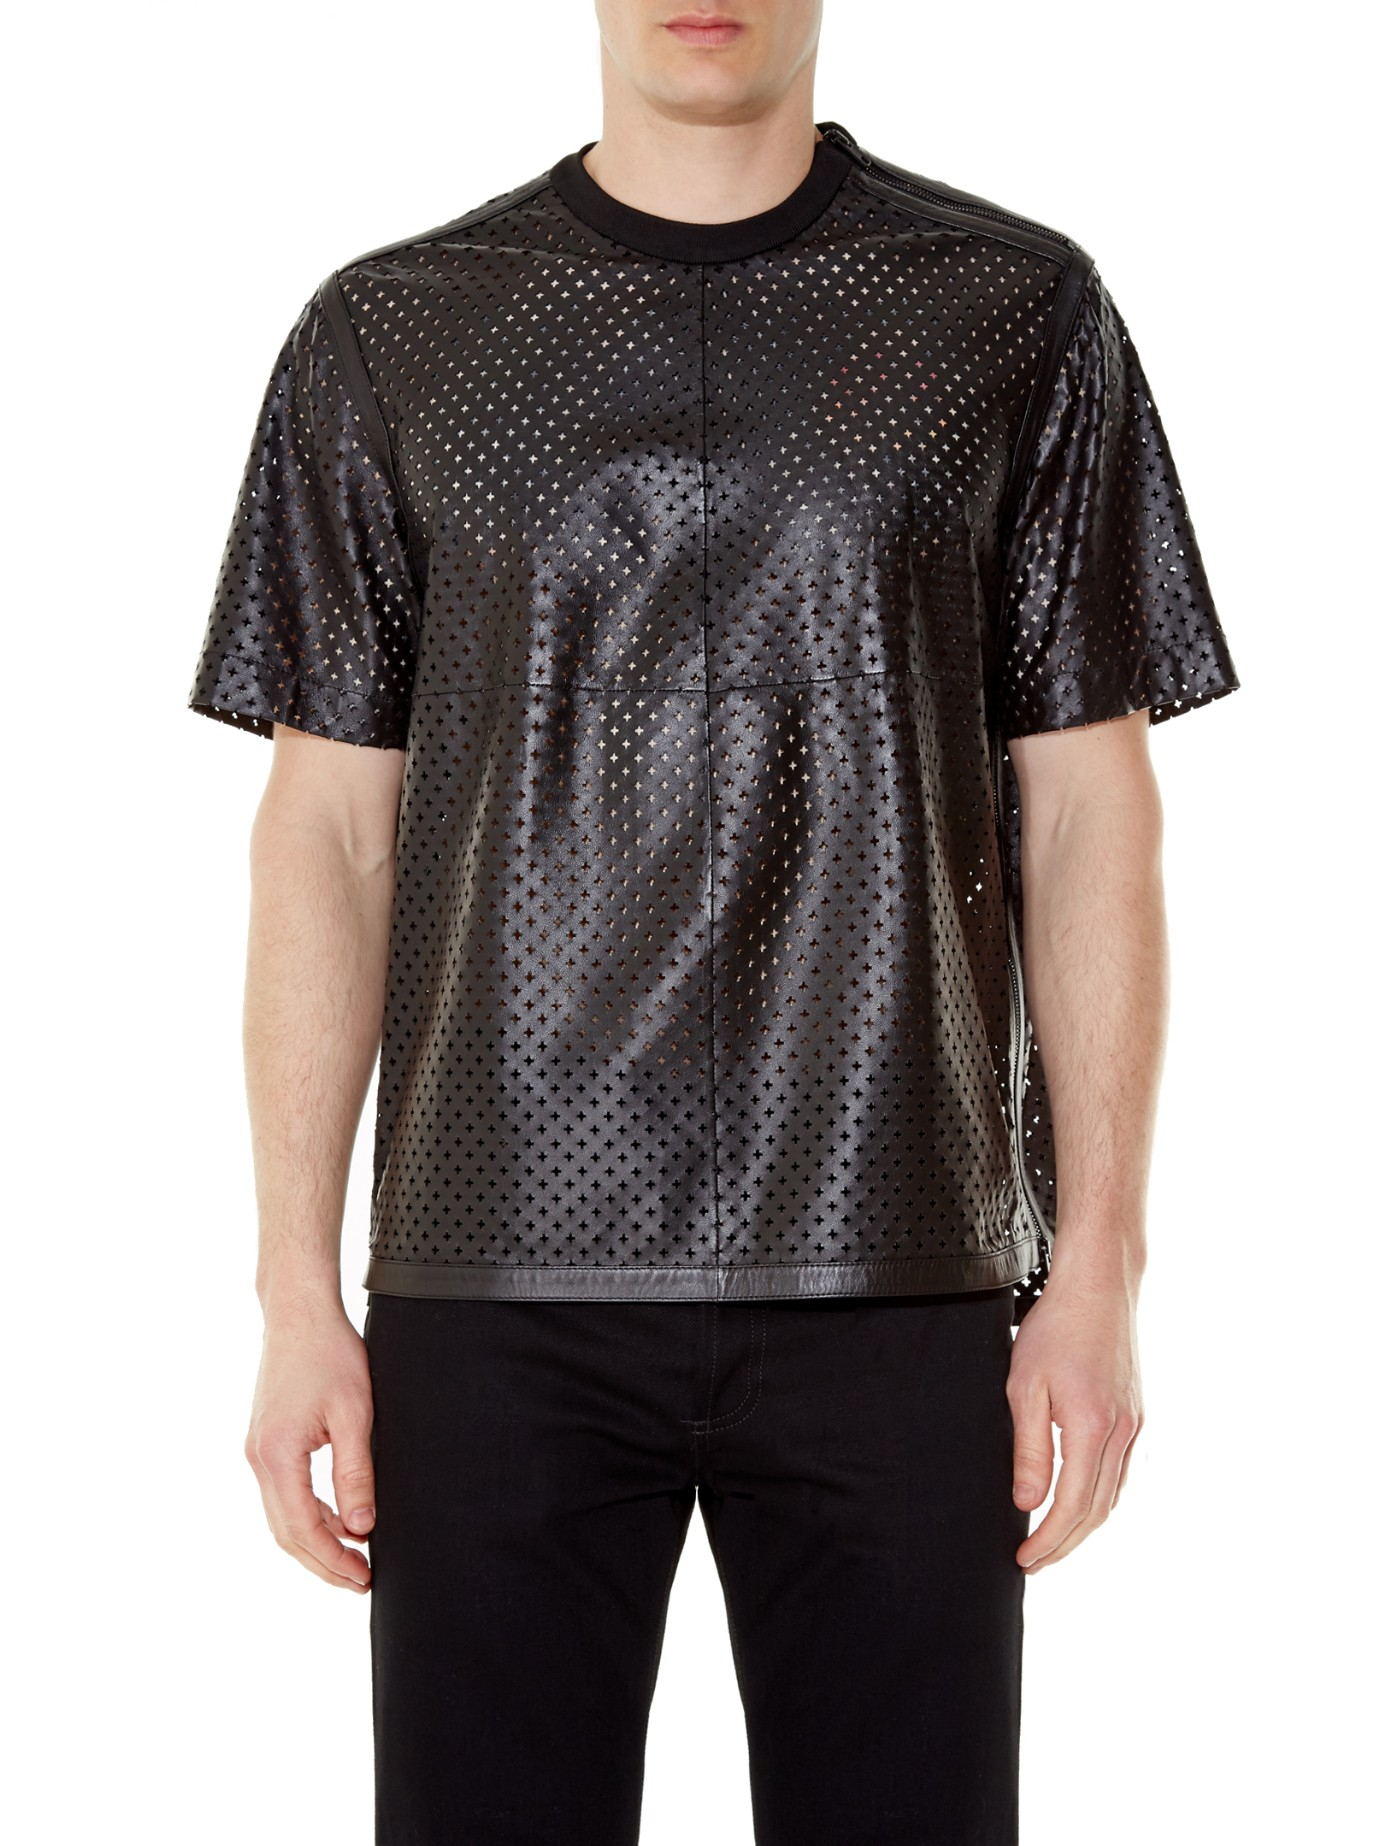 Givenchy Laser-cut Leather T-shirt in Black for Men - Lyst